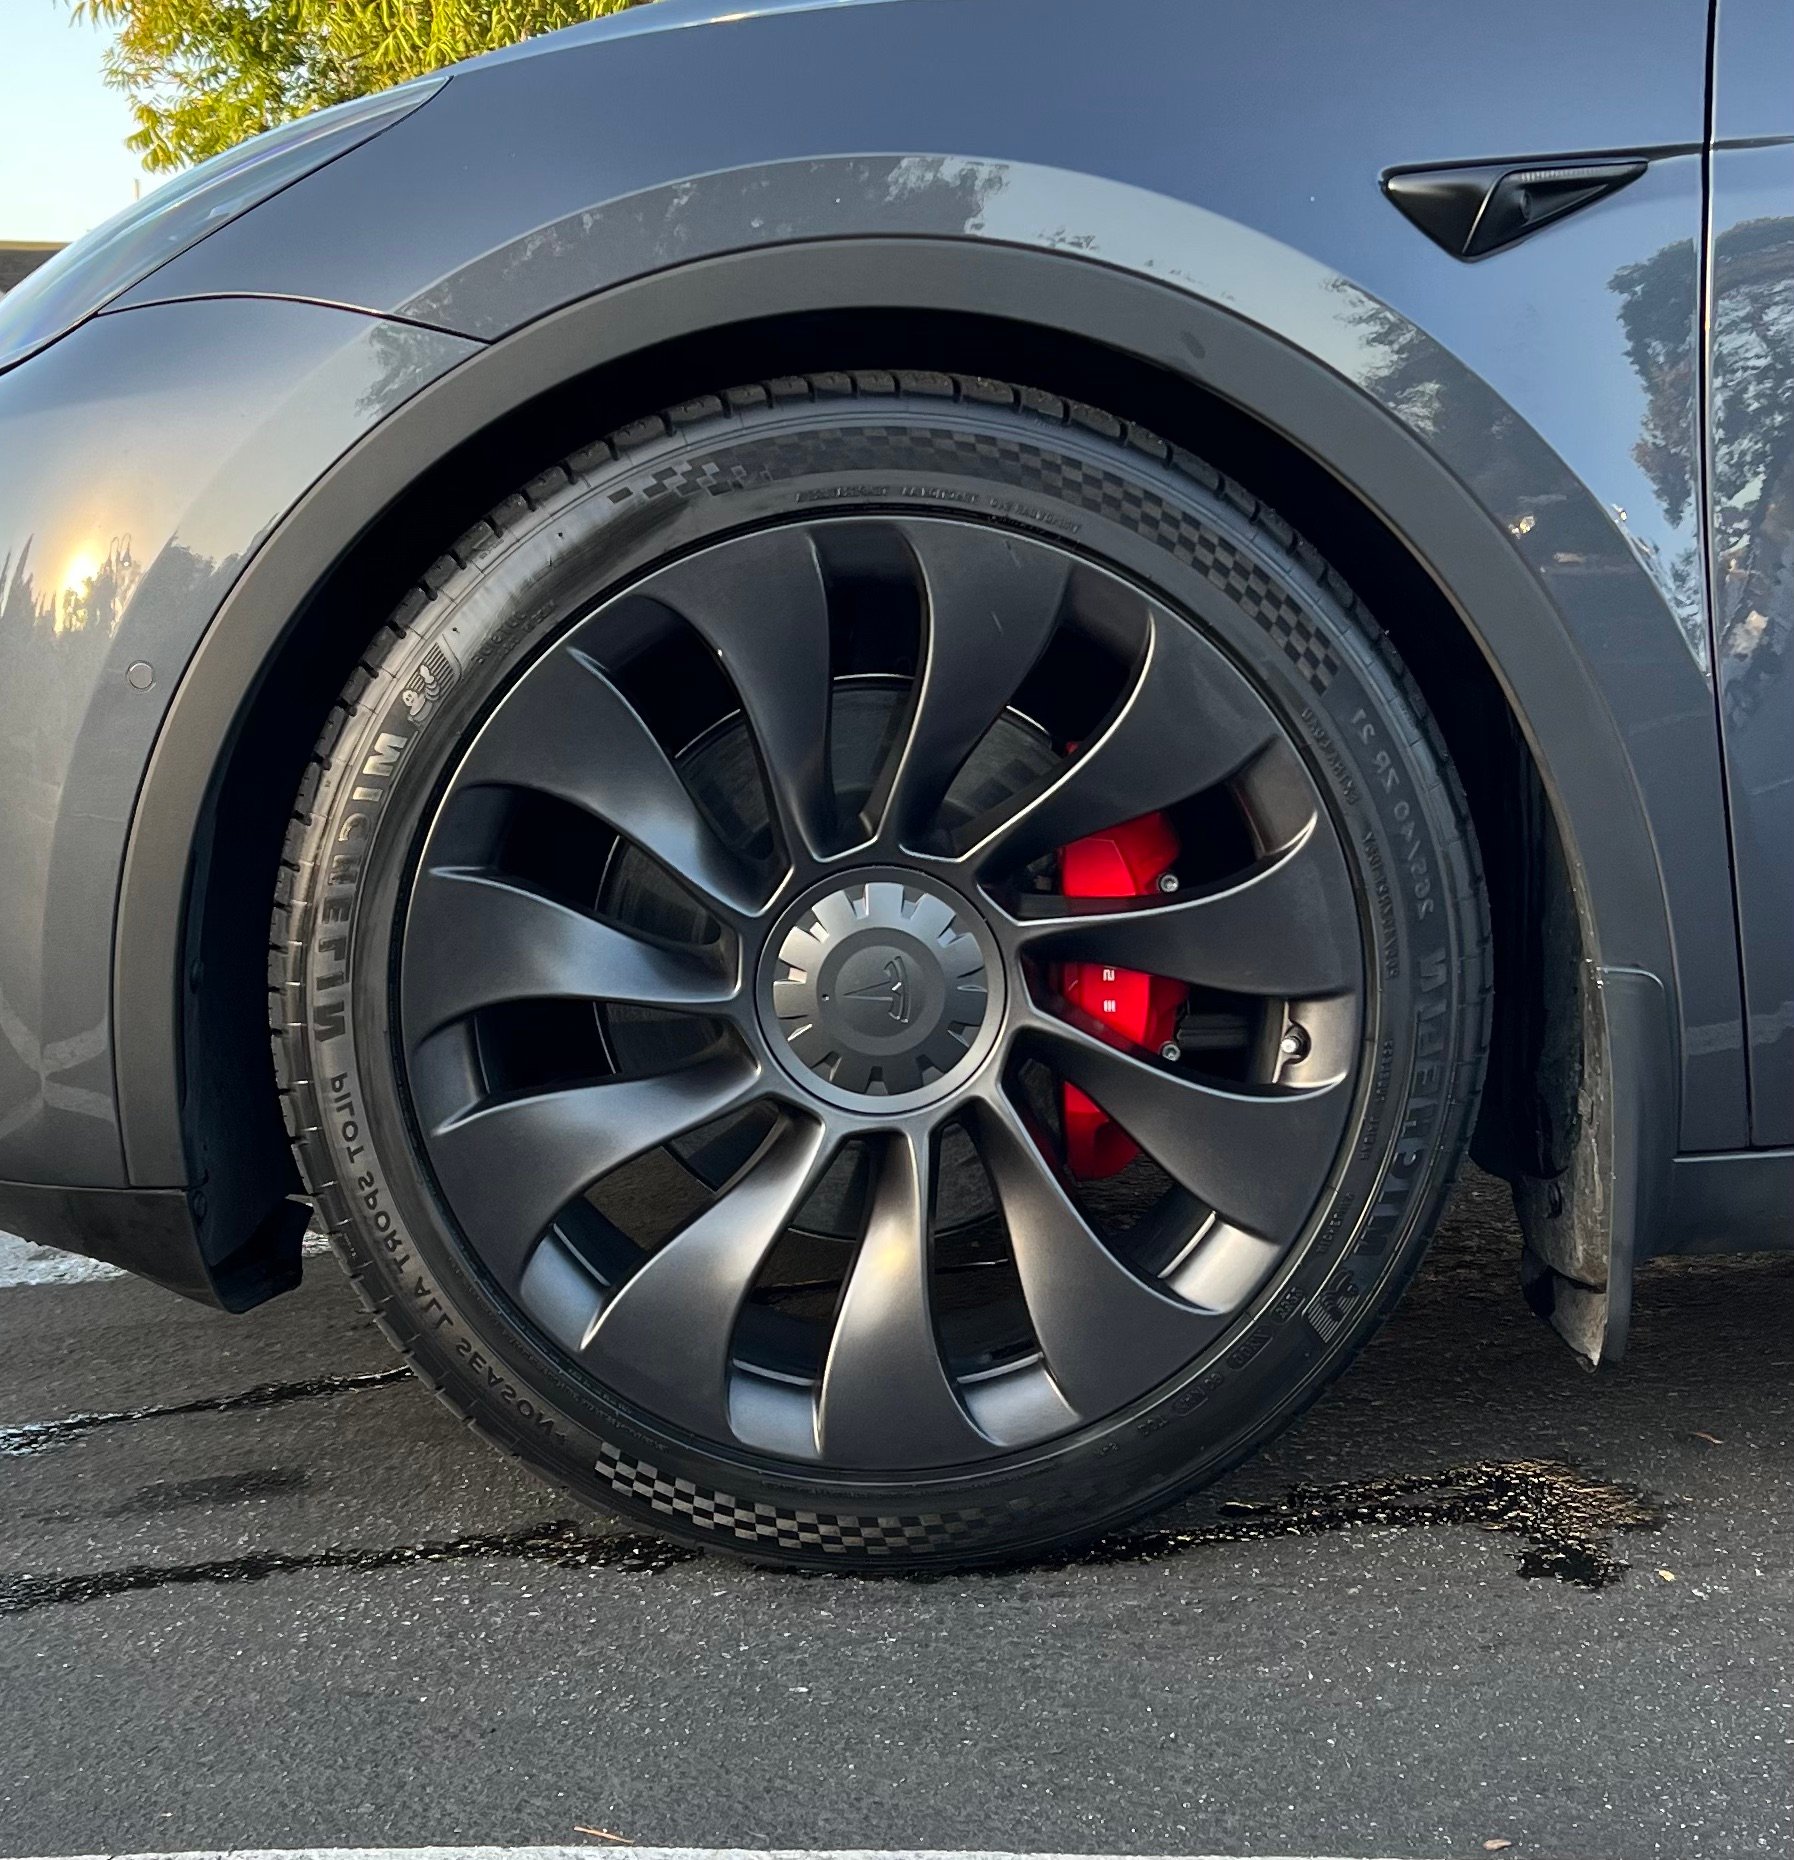 Model Y Performance 21" Tires Larger, More Comfortable Fitment